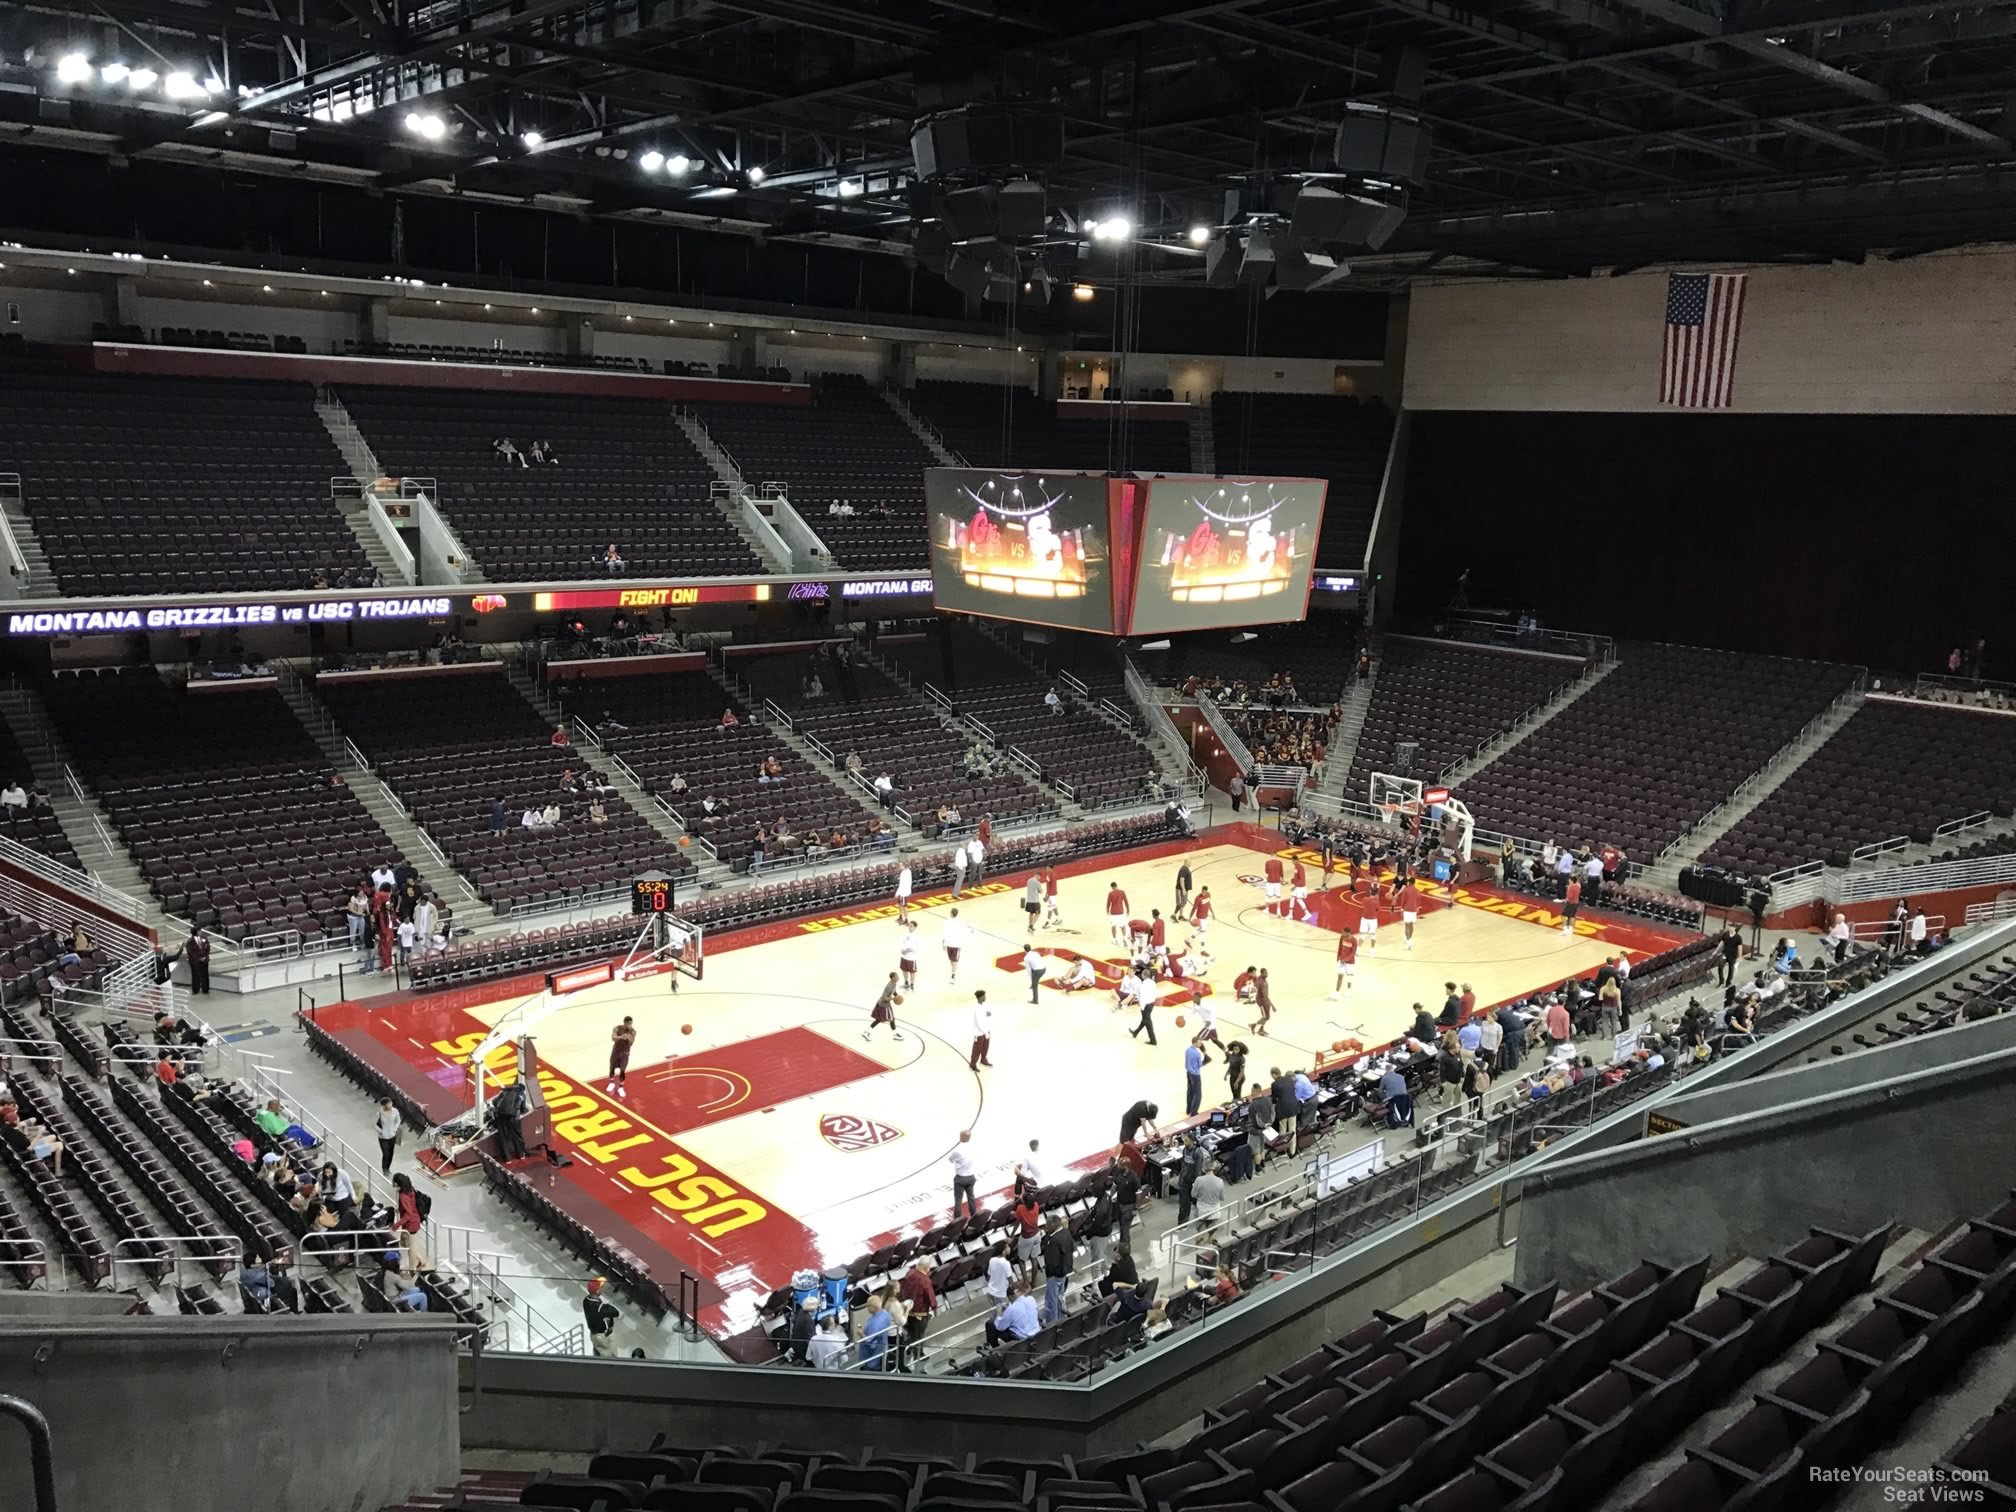 section 215, row 10 seat view  - galen center